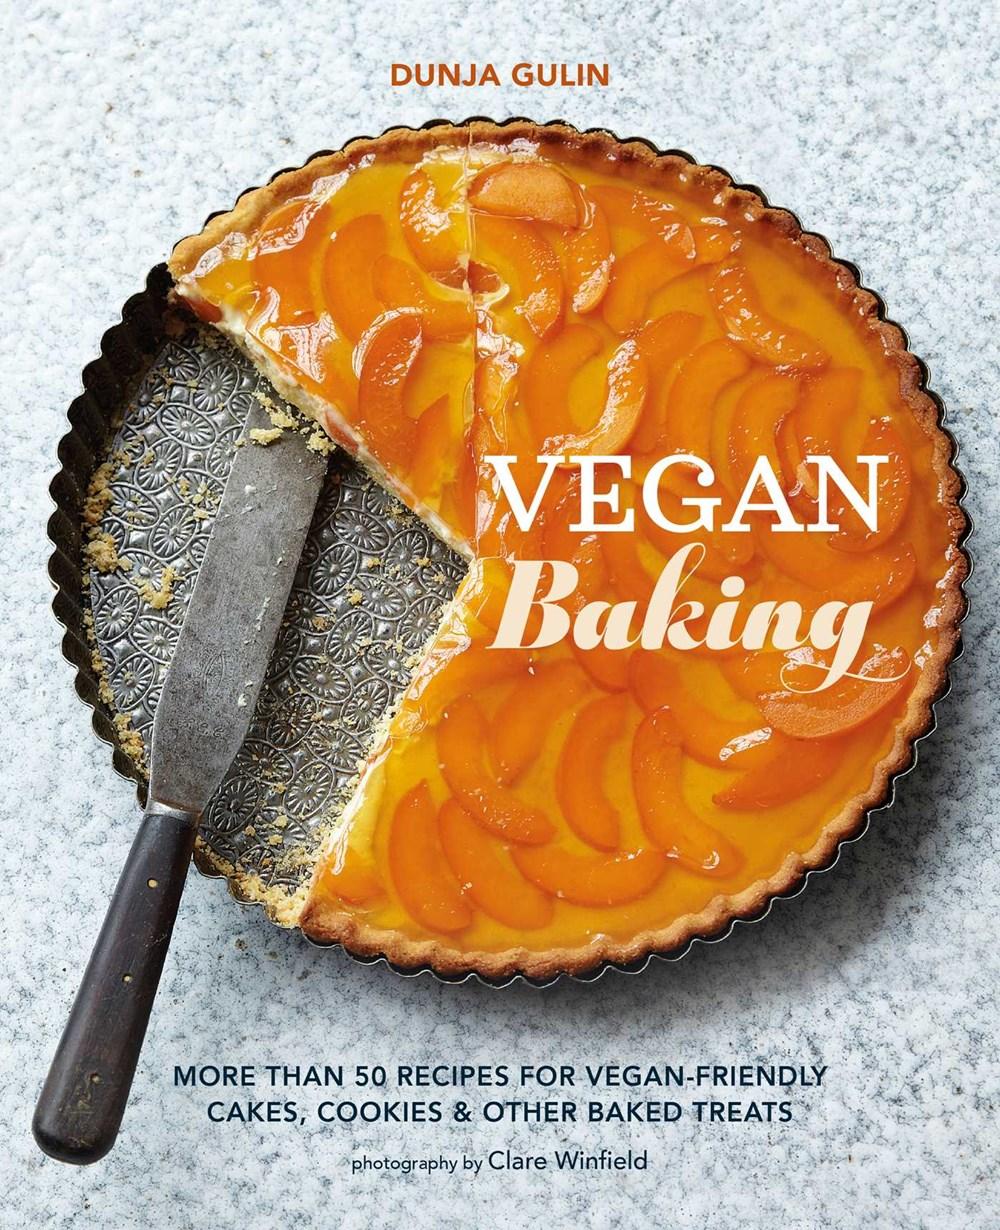 Sách - Vegan Baking - More than 50 recipes for vegan-friendly c by Dunja Gulin (US edition, Hardcover Paper over boards)